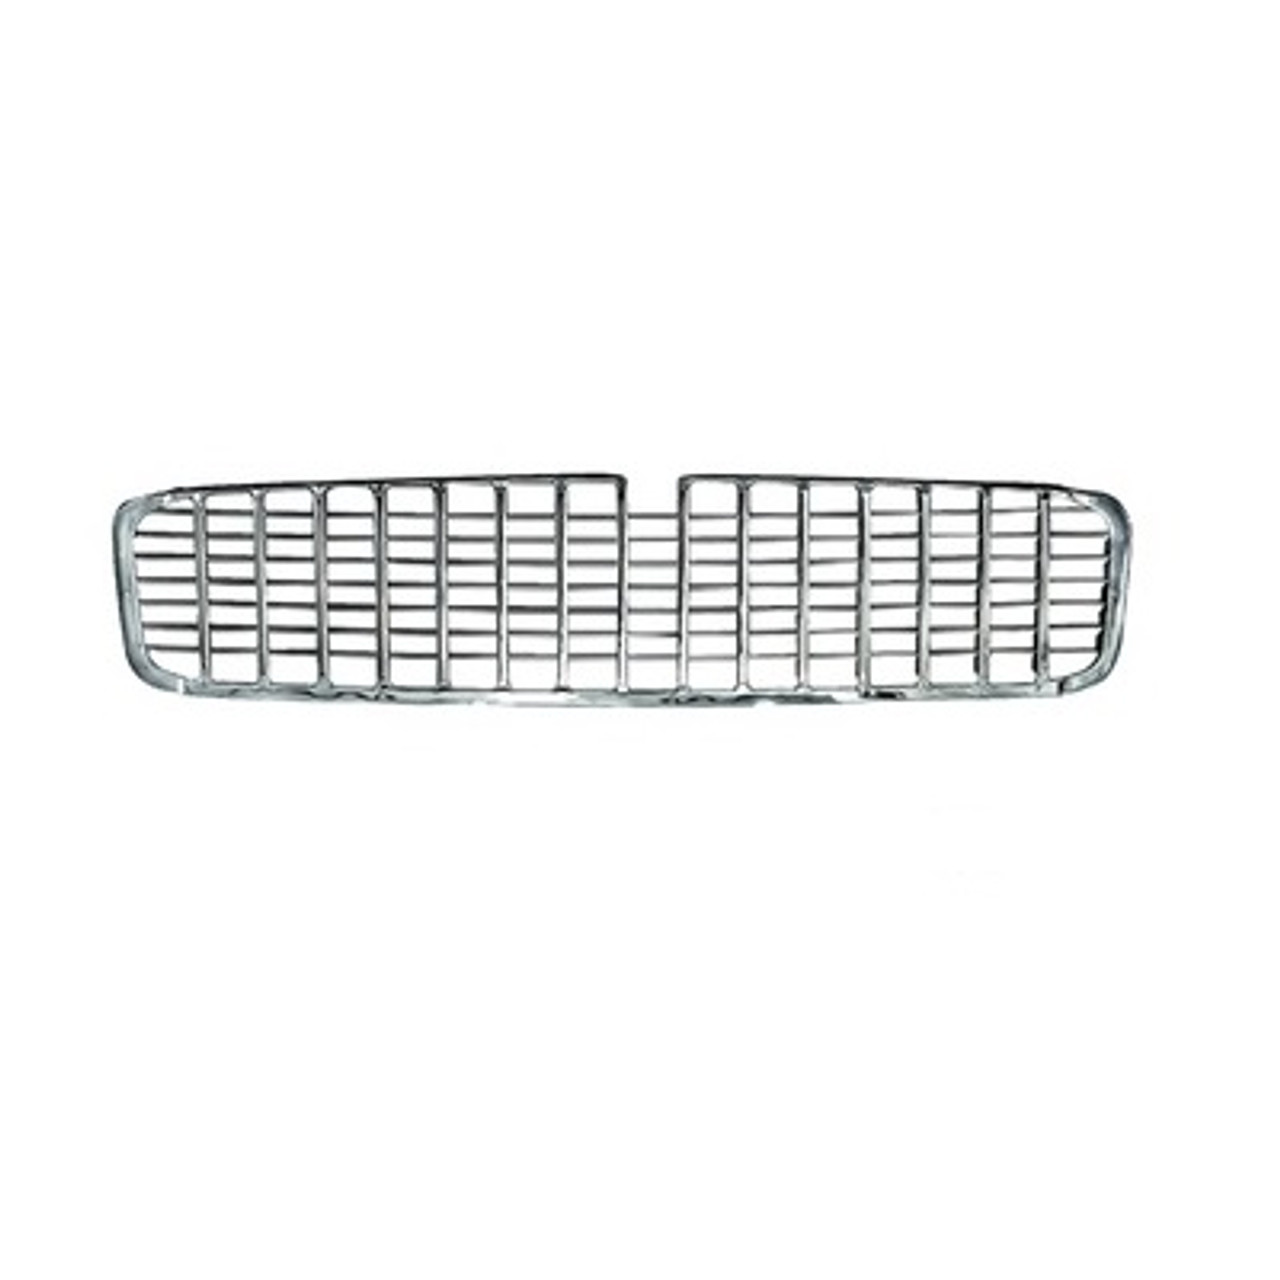 1955 Chevy Bel Air Classic Stainless Grille